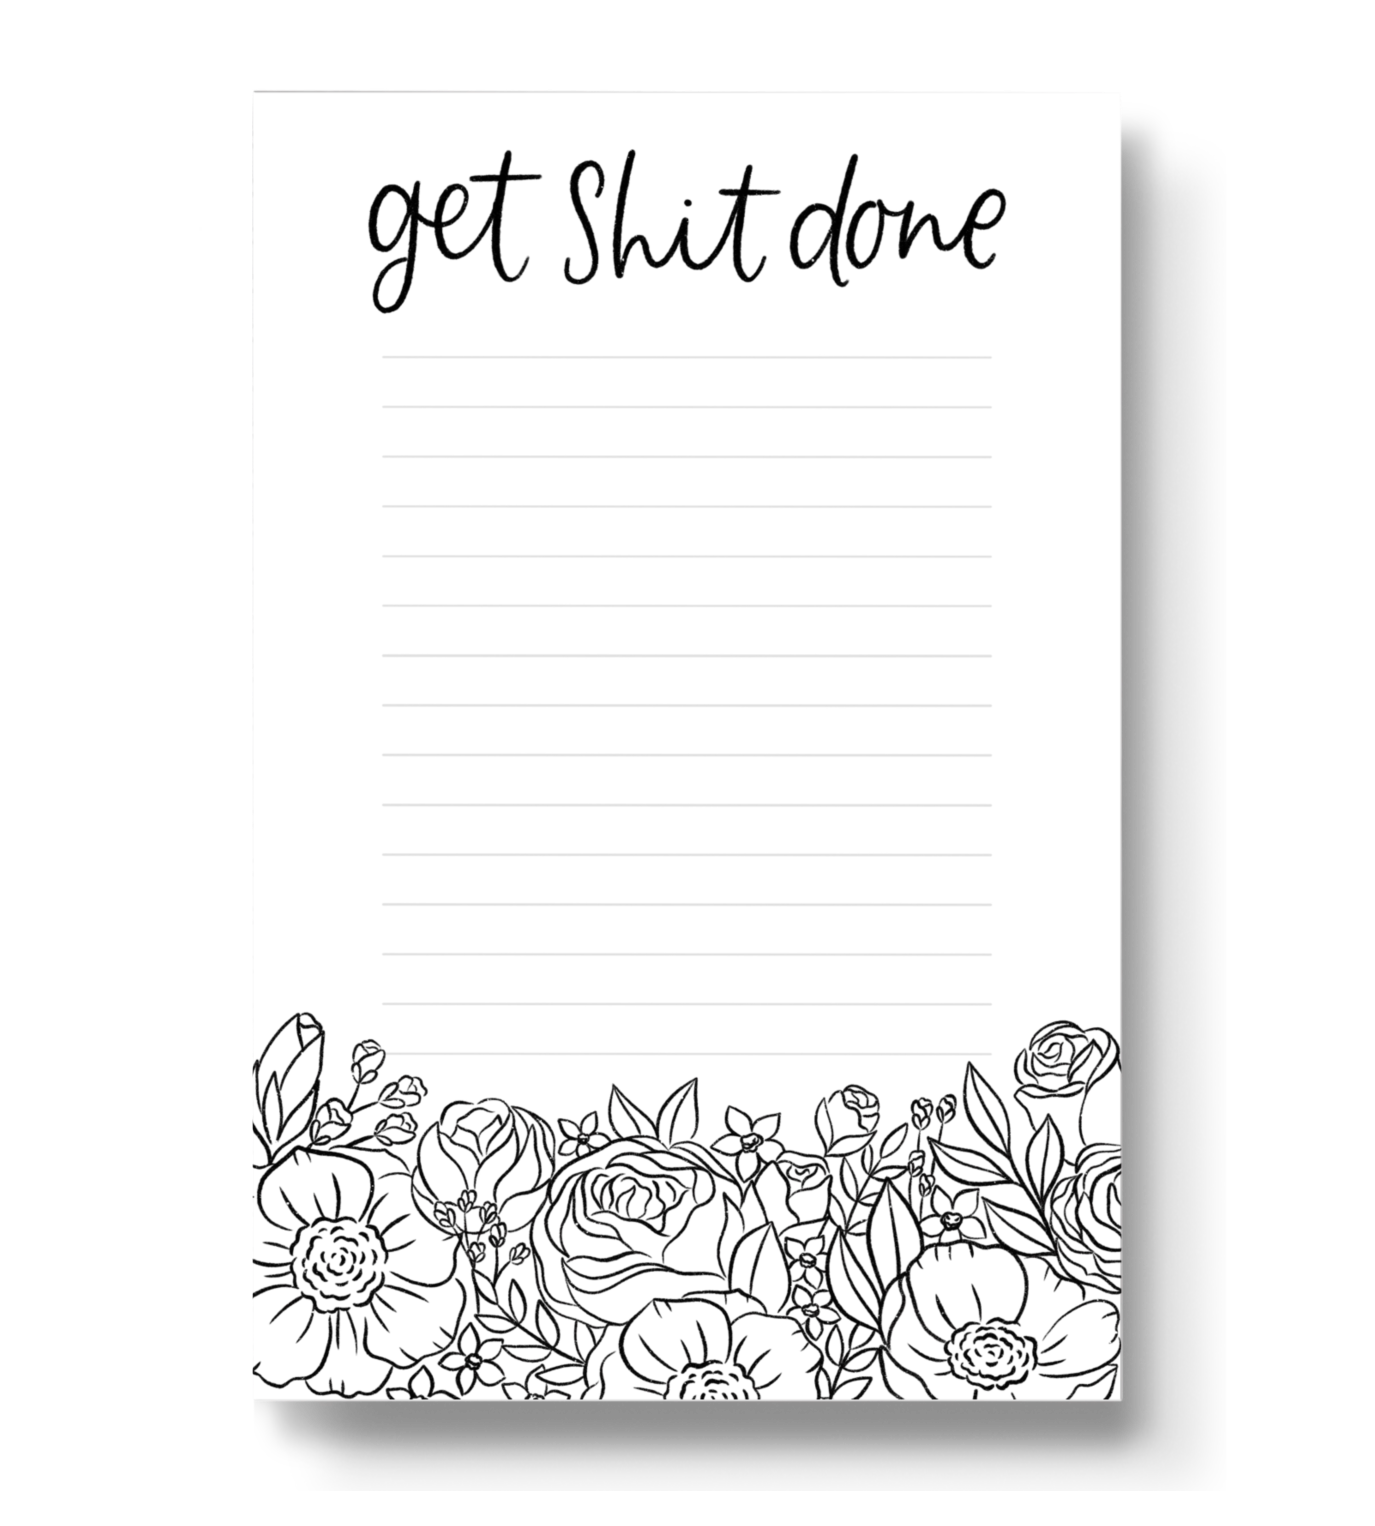 Elyse Breanne Design - Get Shit Done Extra Large Post-It® Notes 4x6 in.  Elyse Breanne Design   -better made easy-eco-friendly-sustainable-gifting